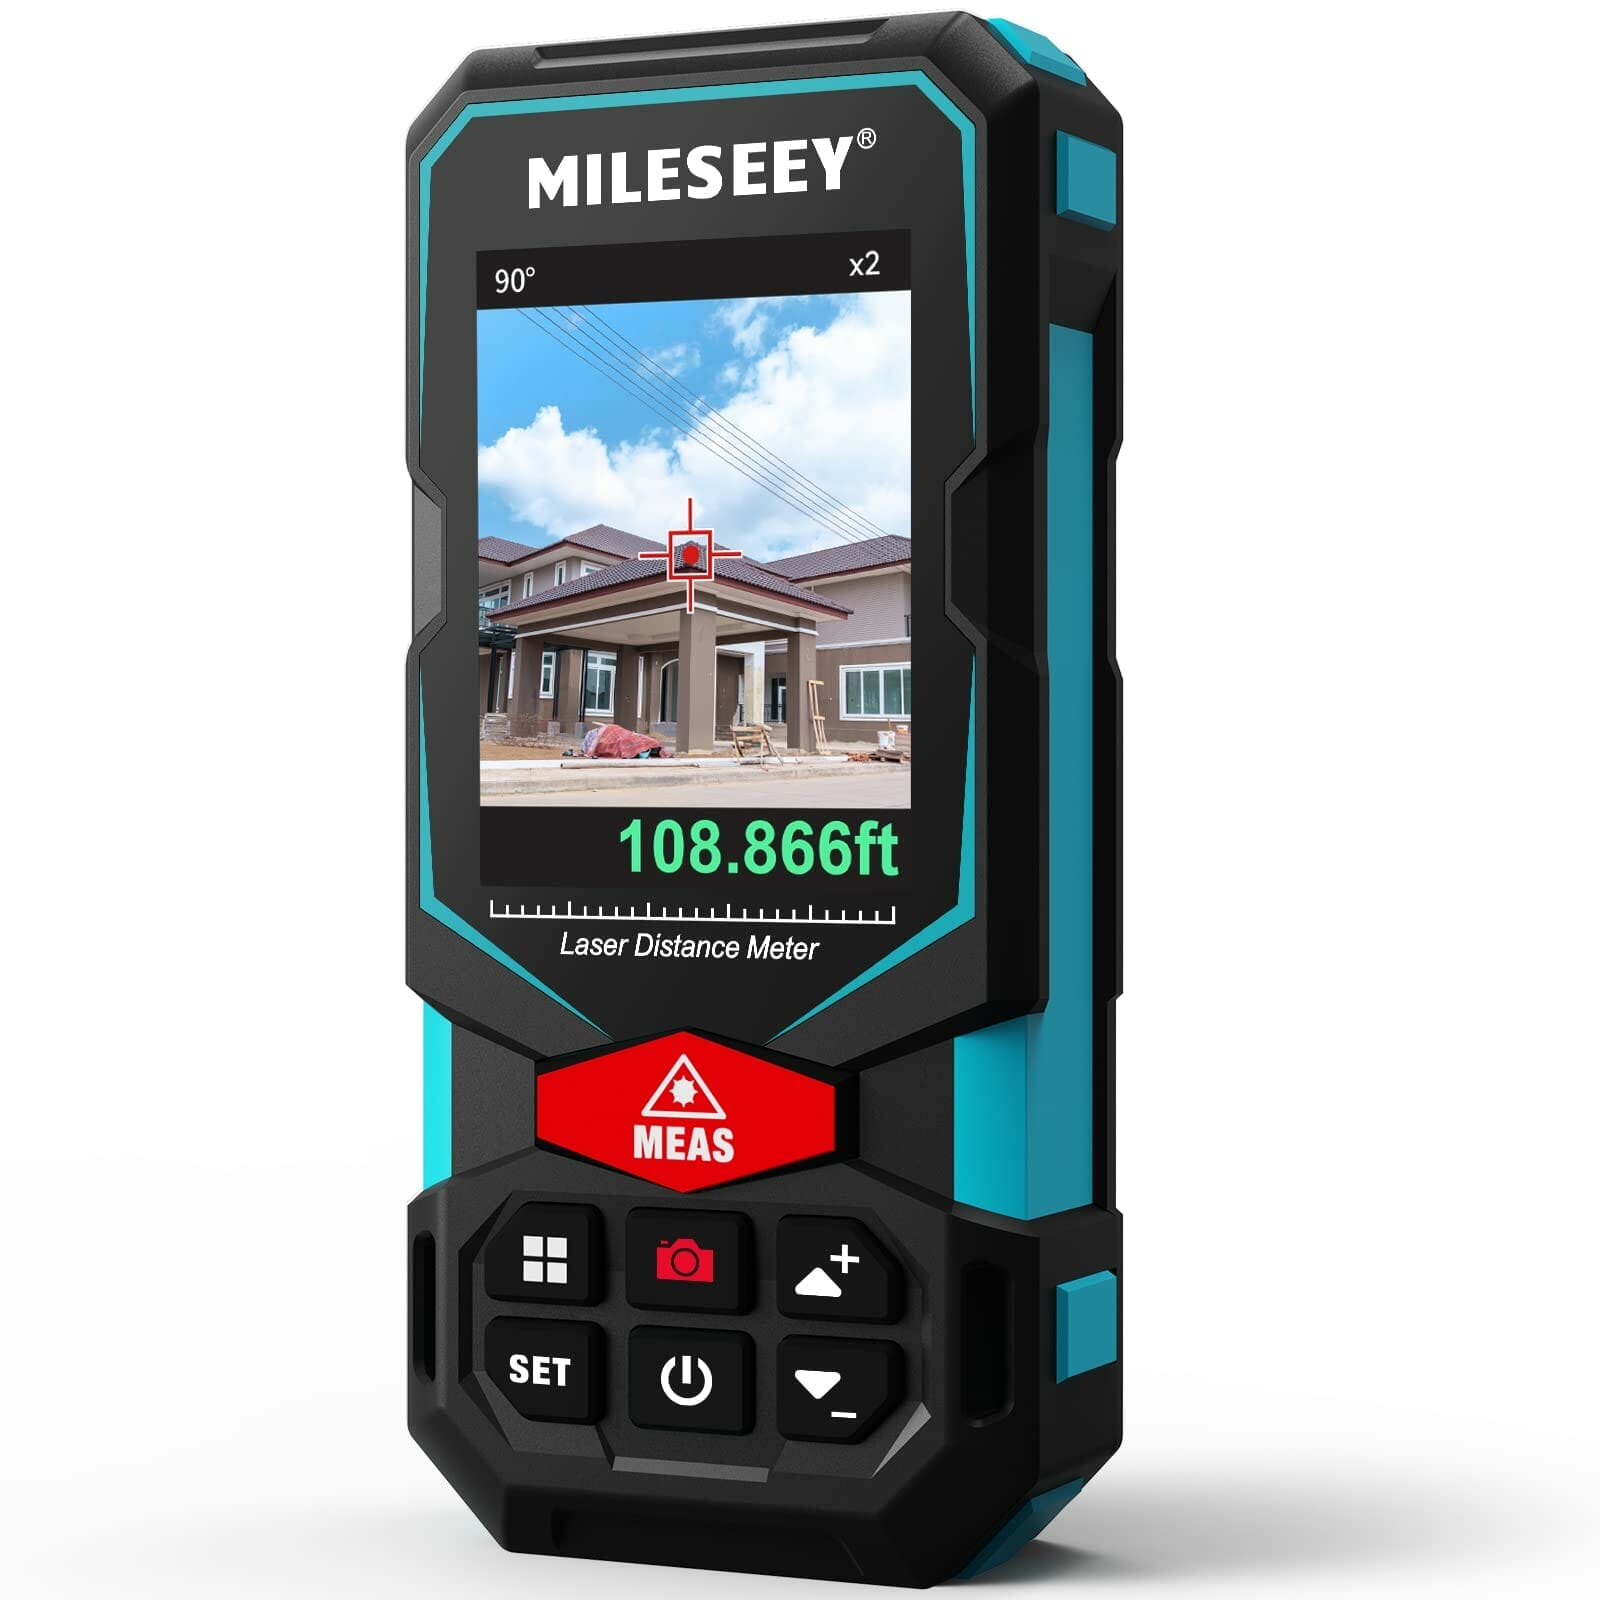 MiLESEEY laser distance meter for a 330 ft review.